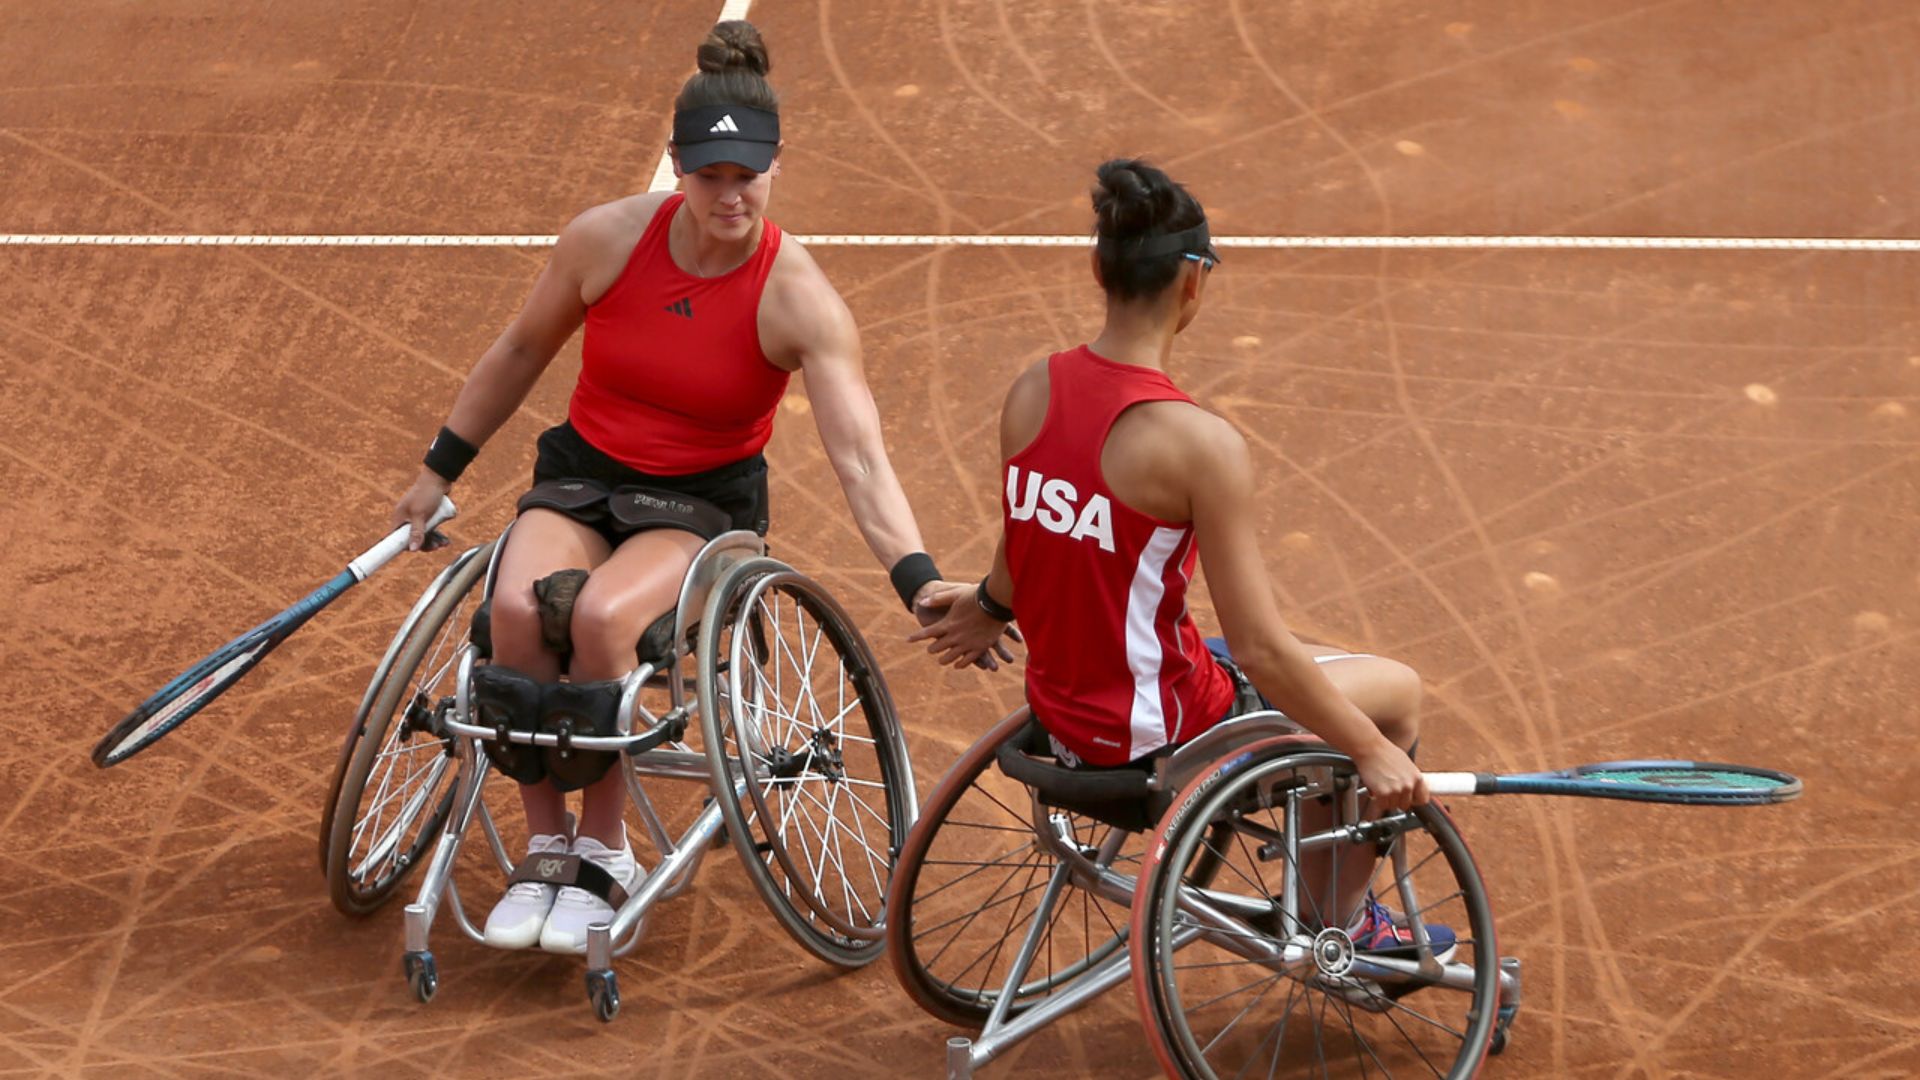 Dana Mathewson and Maylee Phelps Go for Gold in Wheelchair Tennis